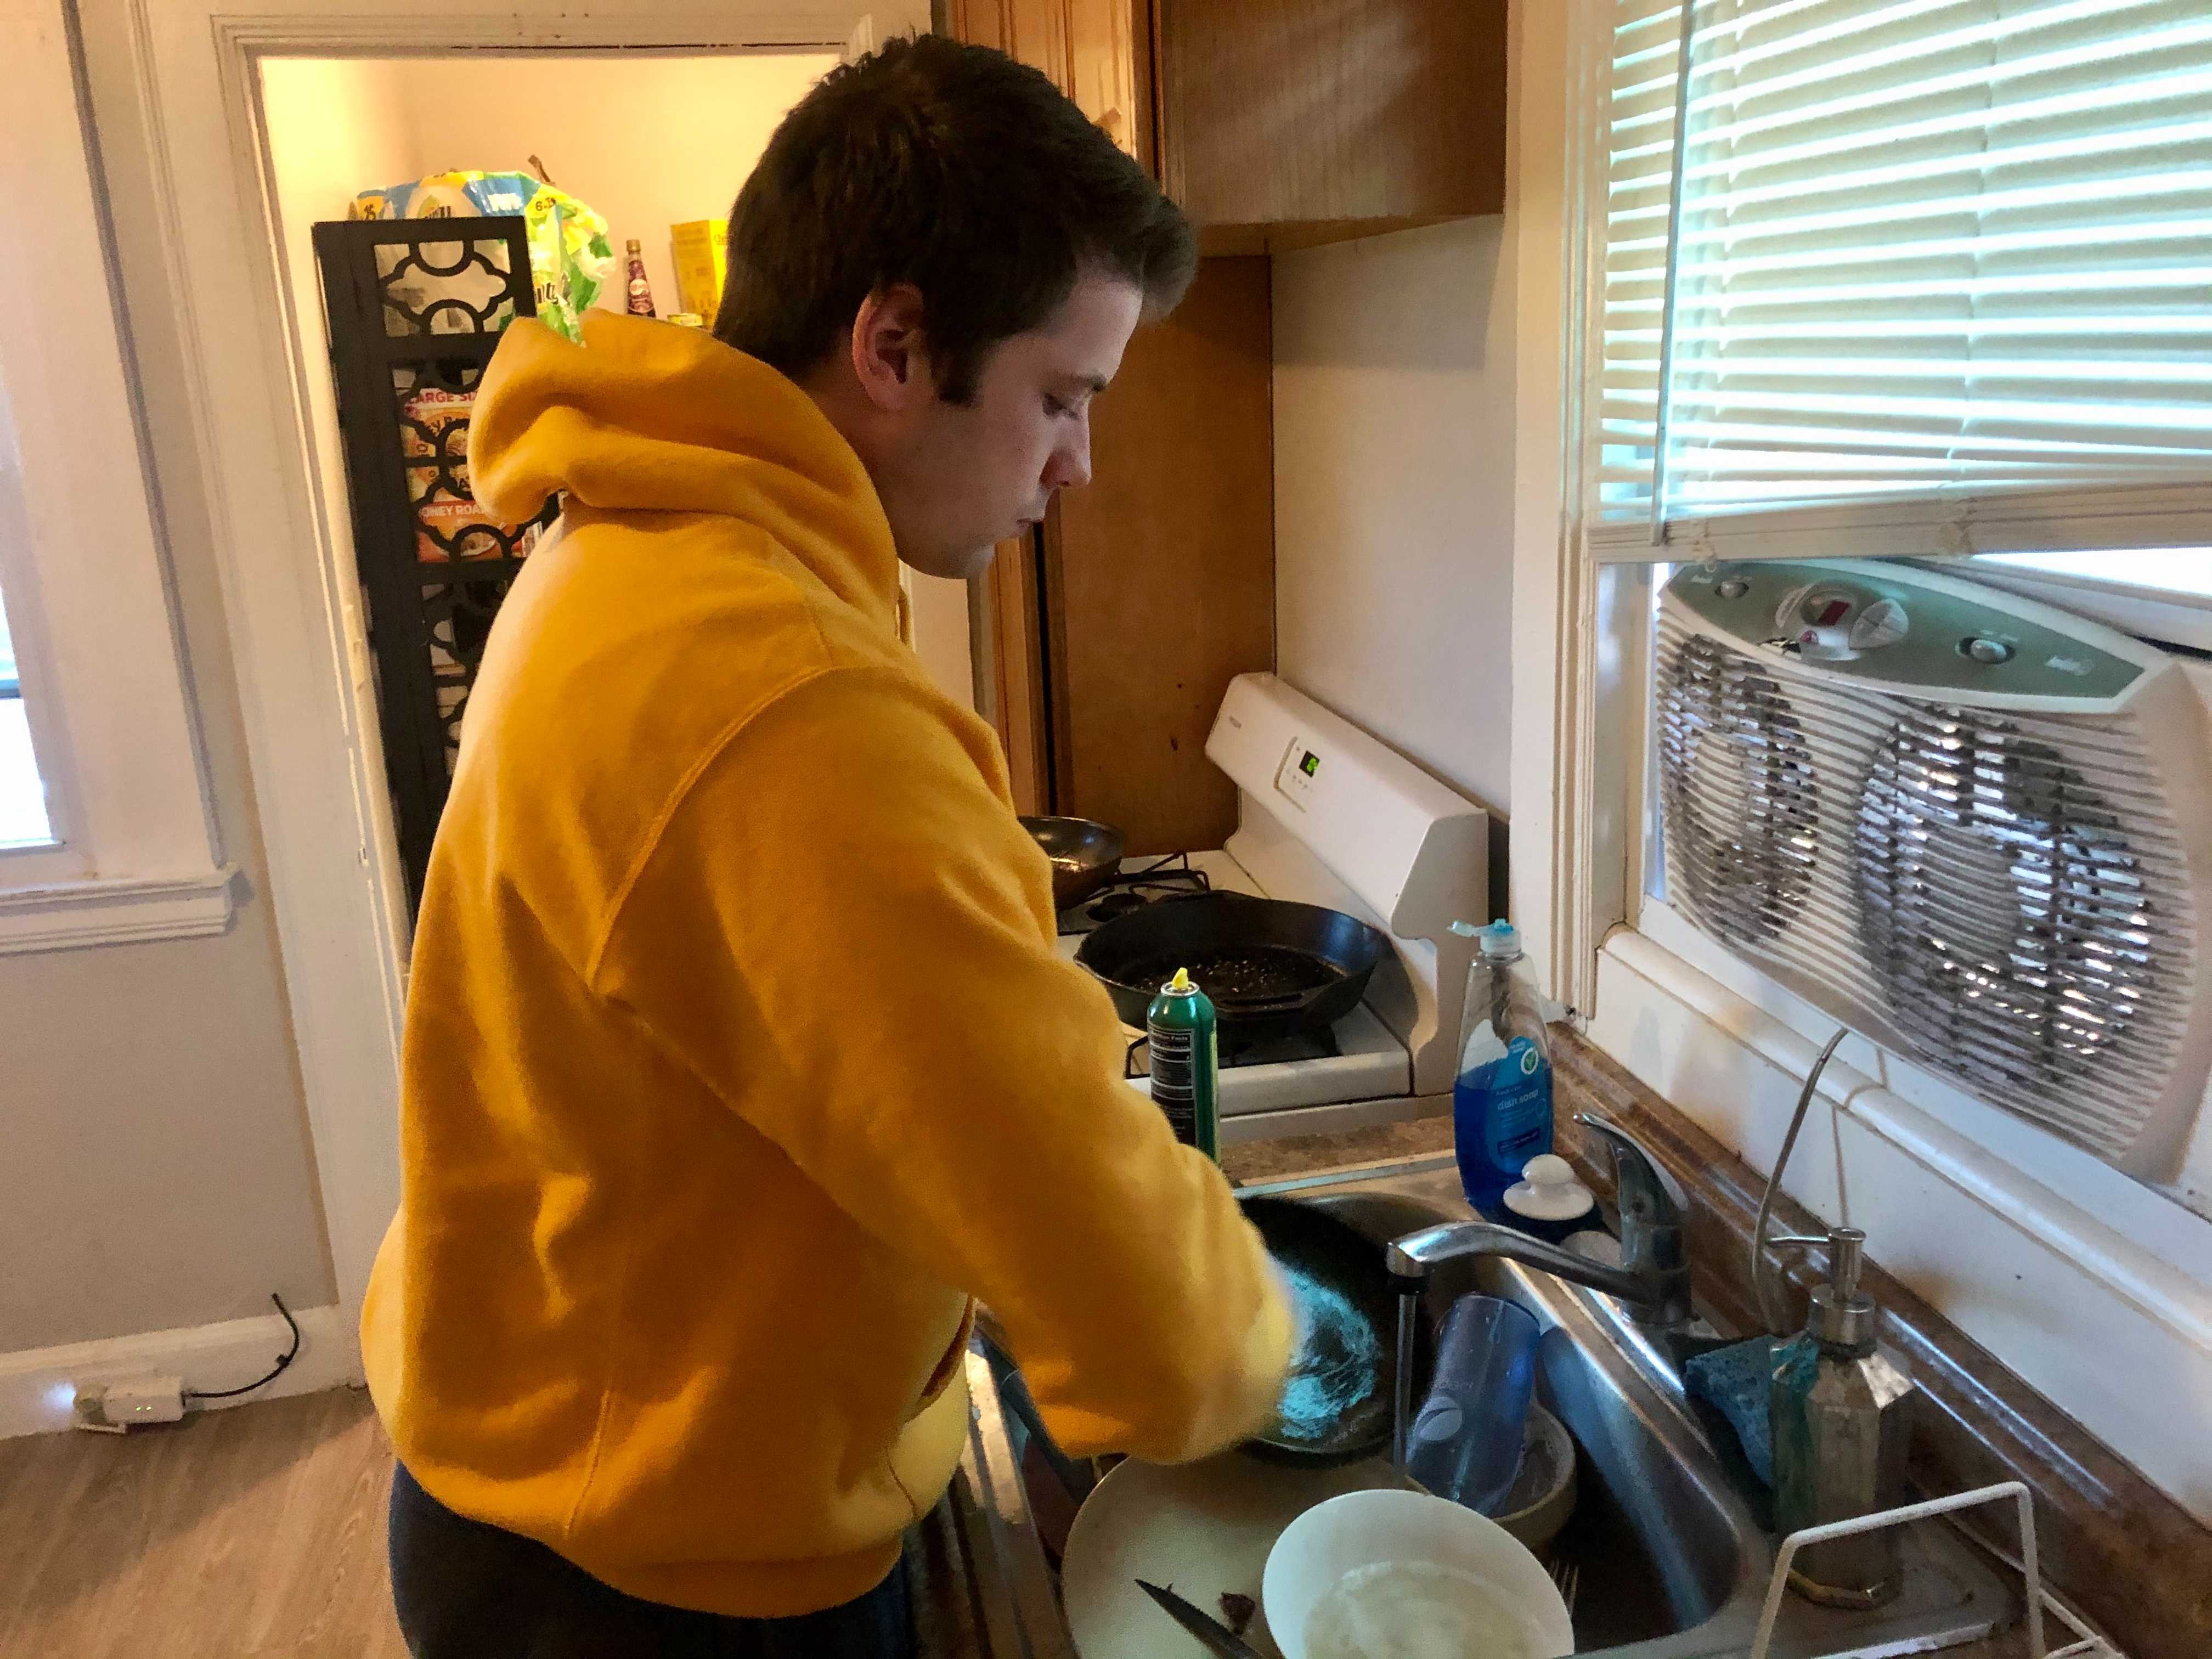 Michael Bottazzi cleans his dirty dishes in the sink.